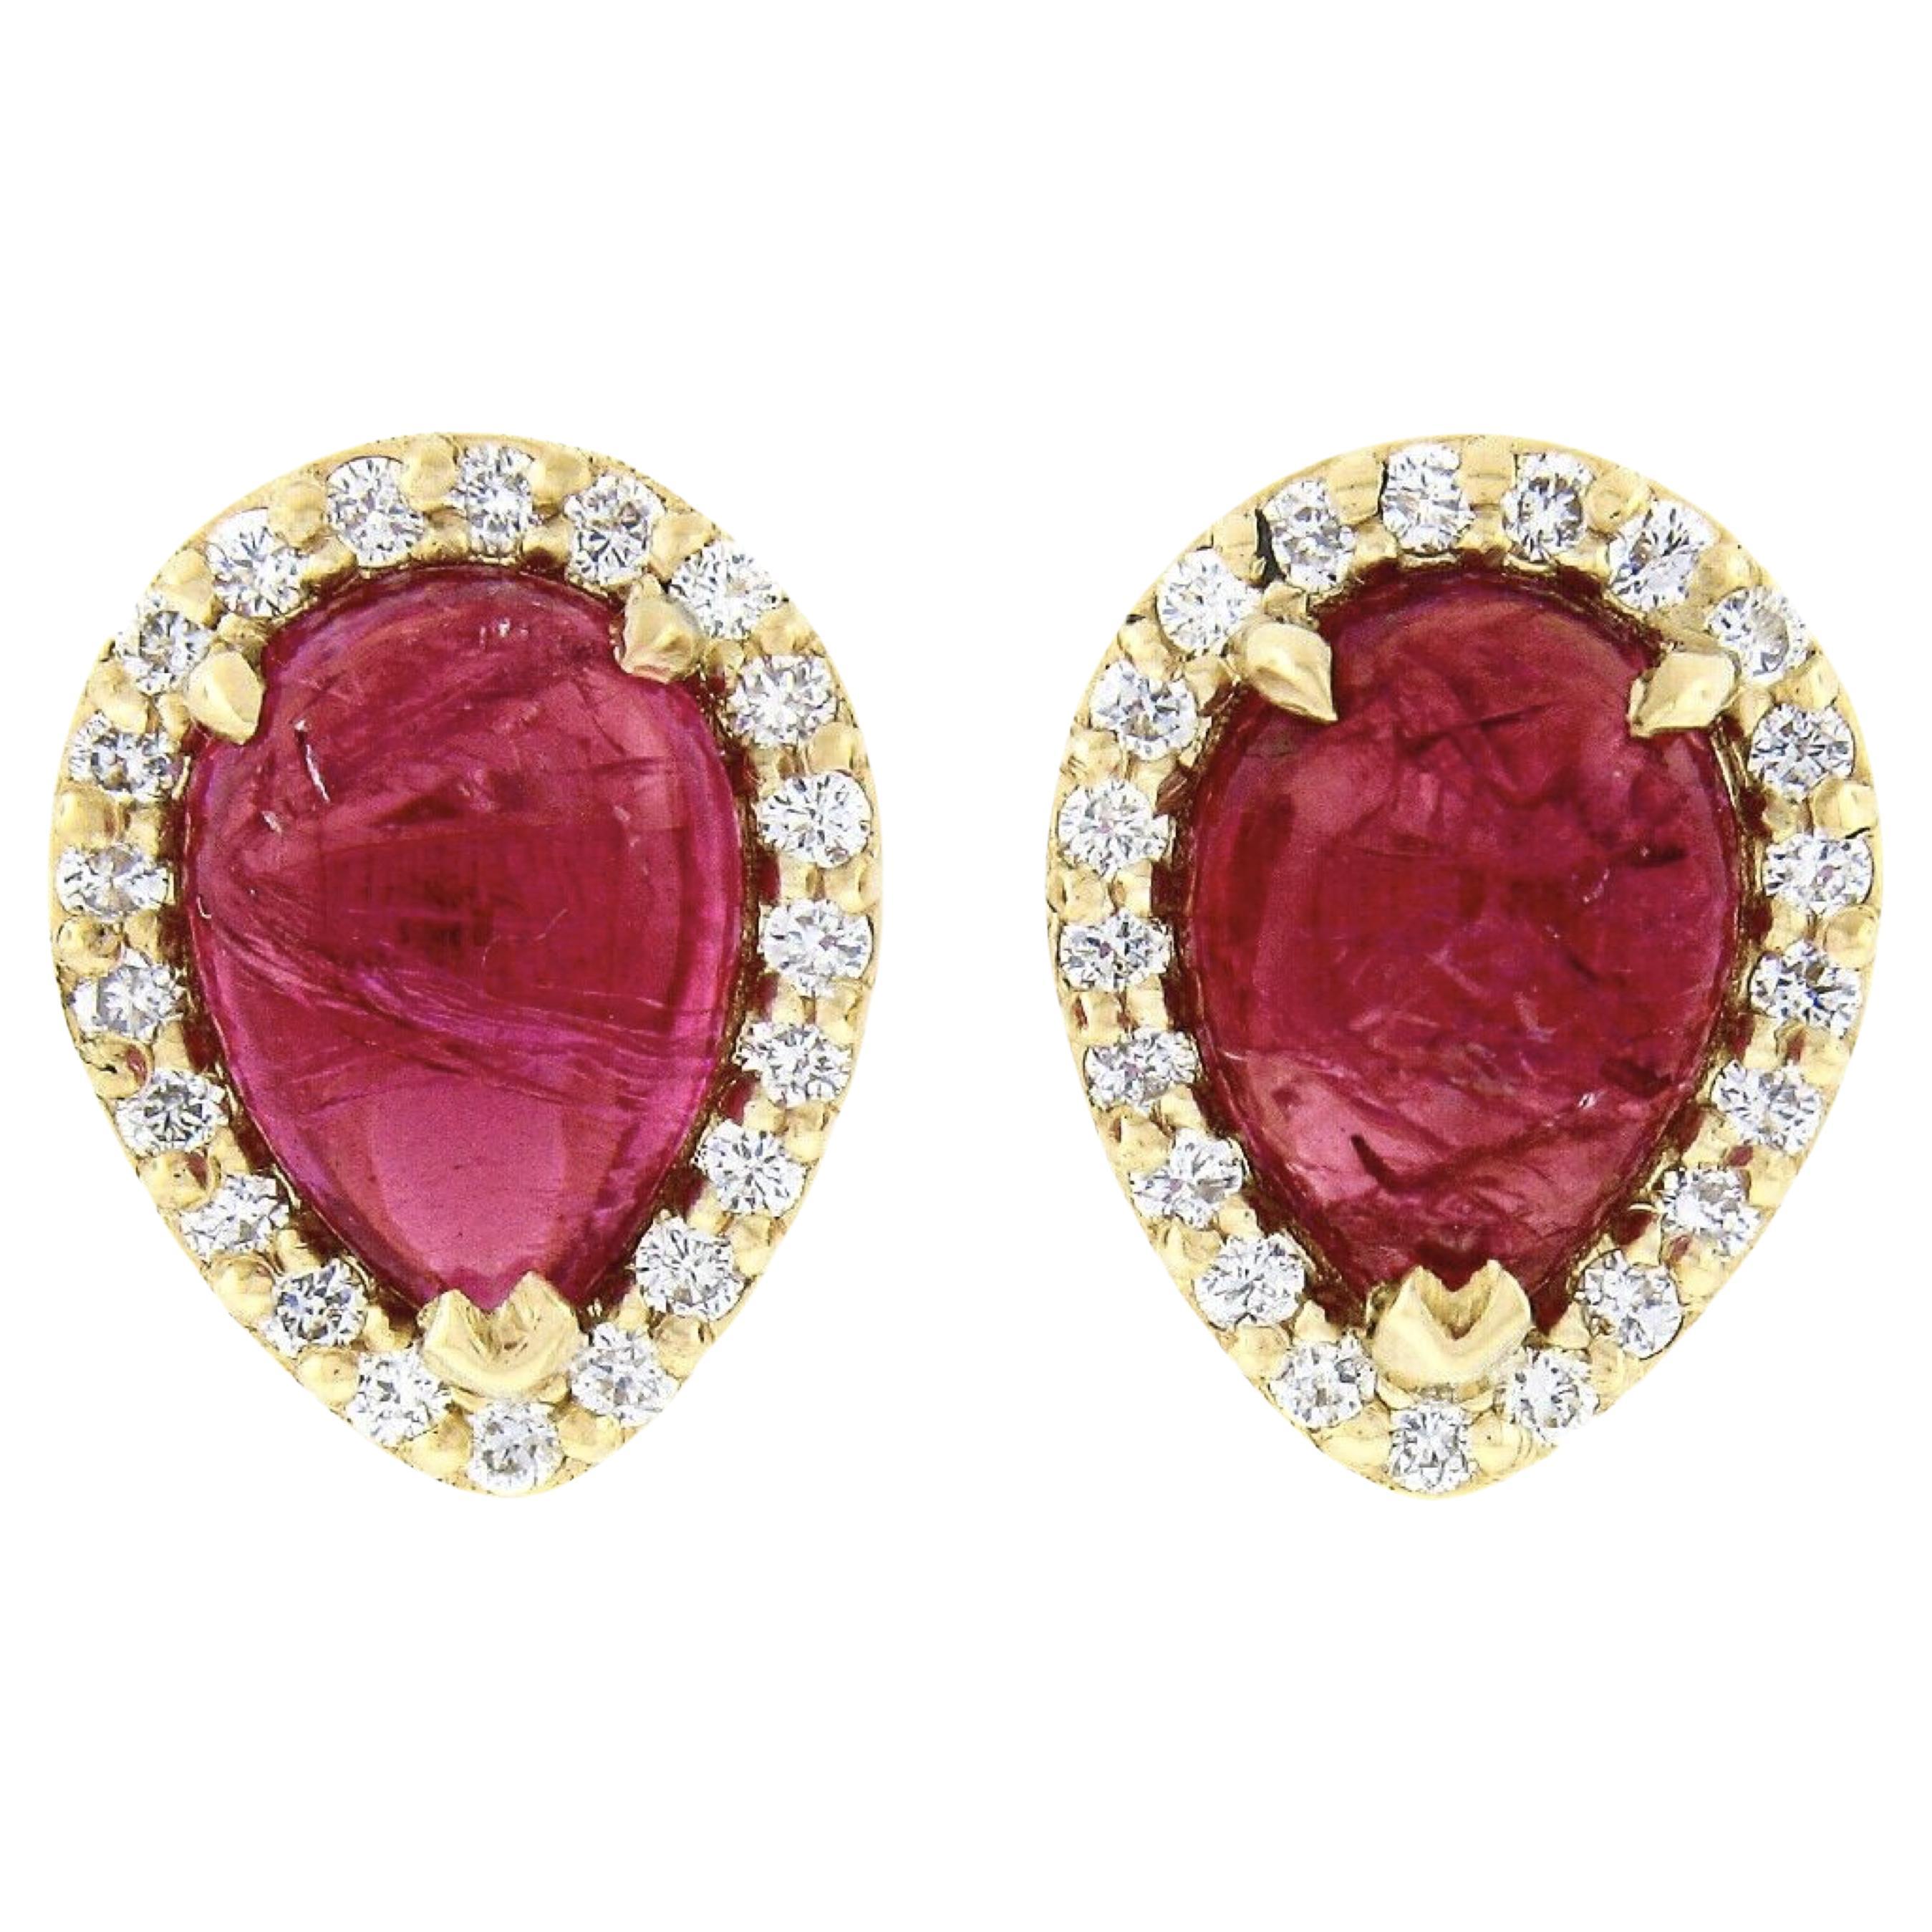 New 14K Yellow Gold 2.98ct Pear Cabochon Ruby W/ Pave Diamond Halo Stud Earrings For Sale